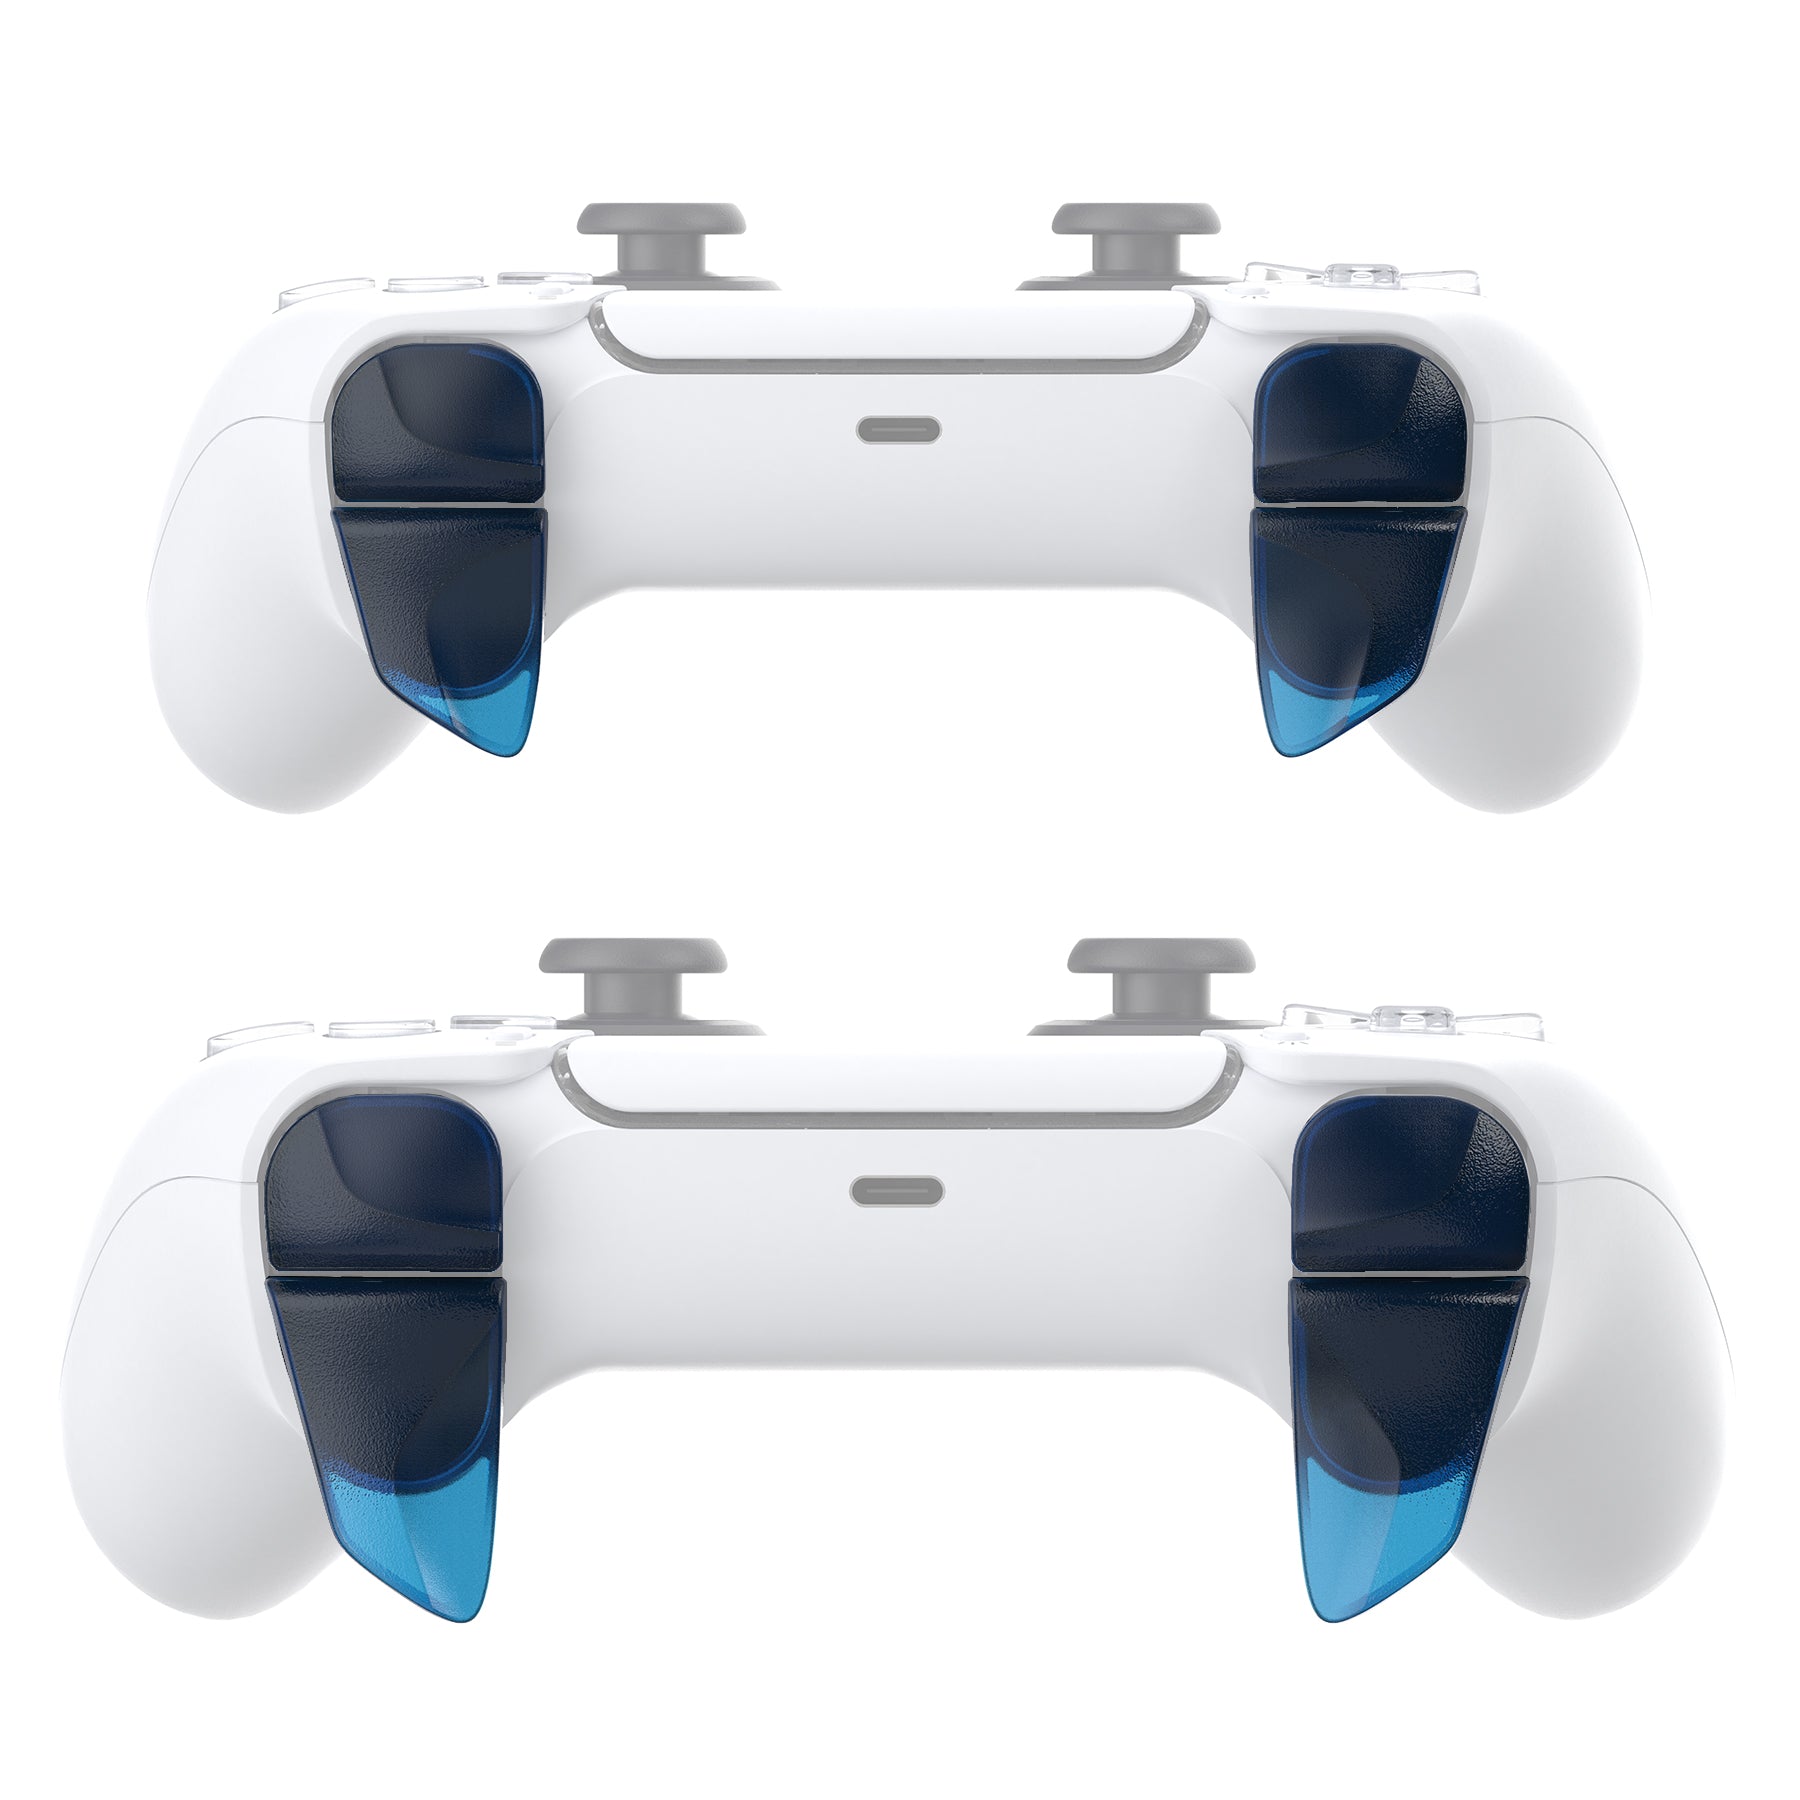 PlayVital Clear Blue 2 Pair Shoulder Buttons Extension Triggers for PS5 Controller, Game Improvement Adjusters for PS5 Controller, Bumper Trigger Extenders for PS5 Controller - PFPJ043 PlayVital